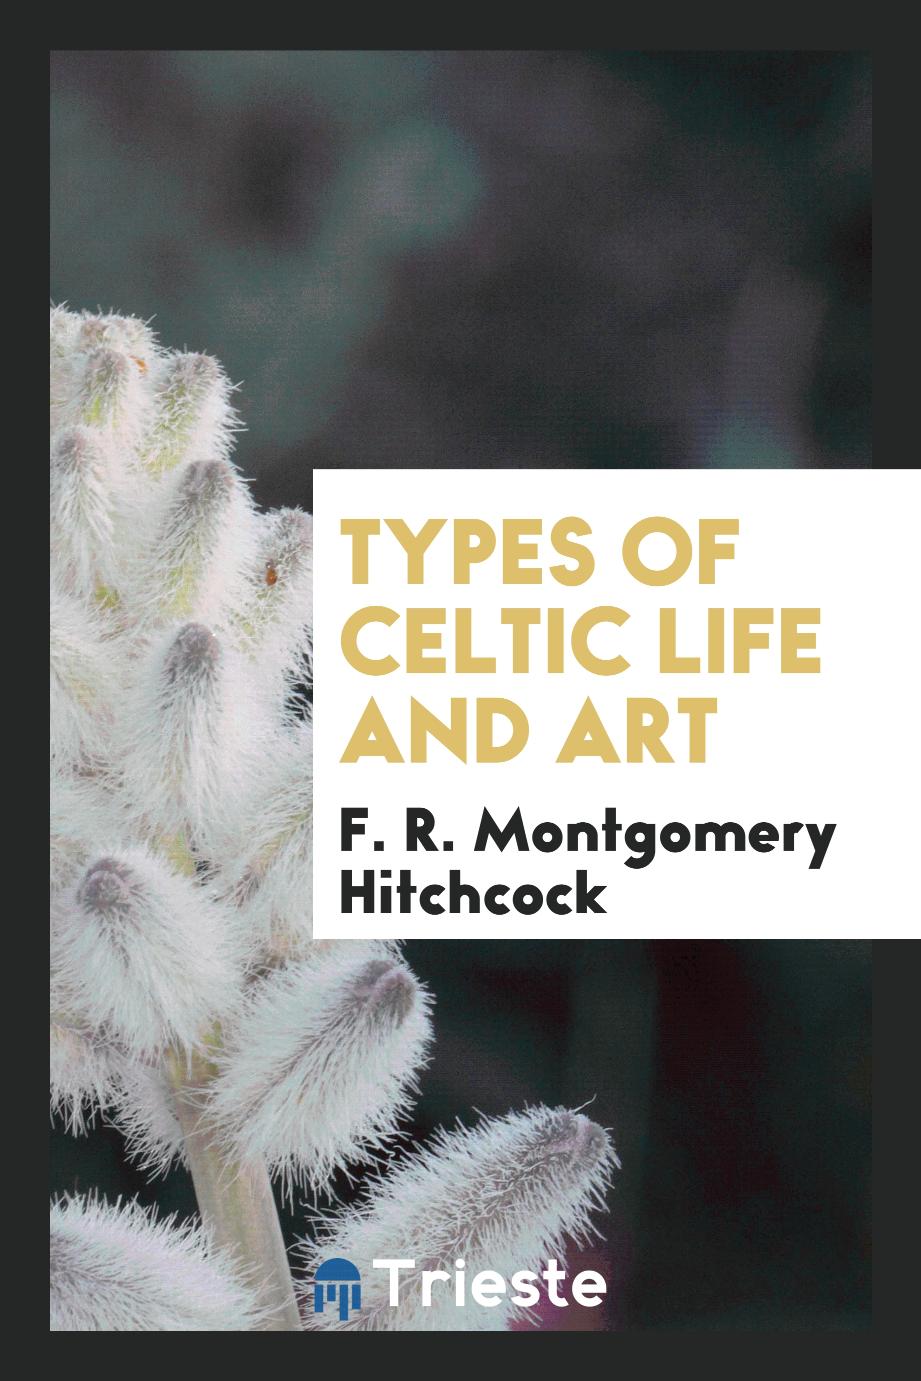 Types of Celtic life and art